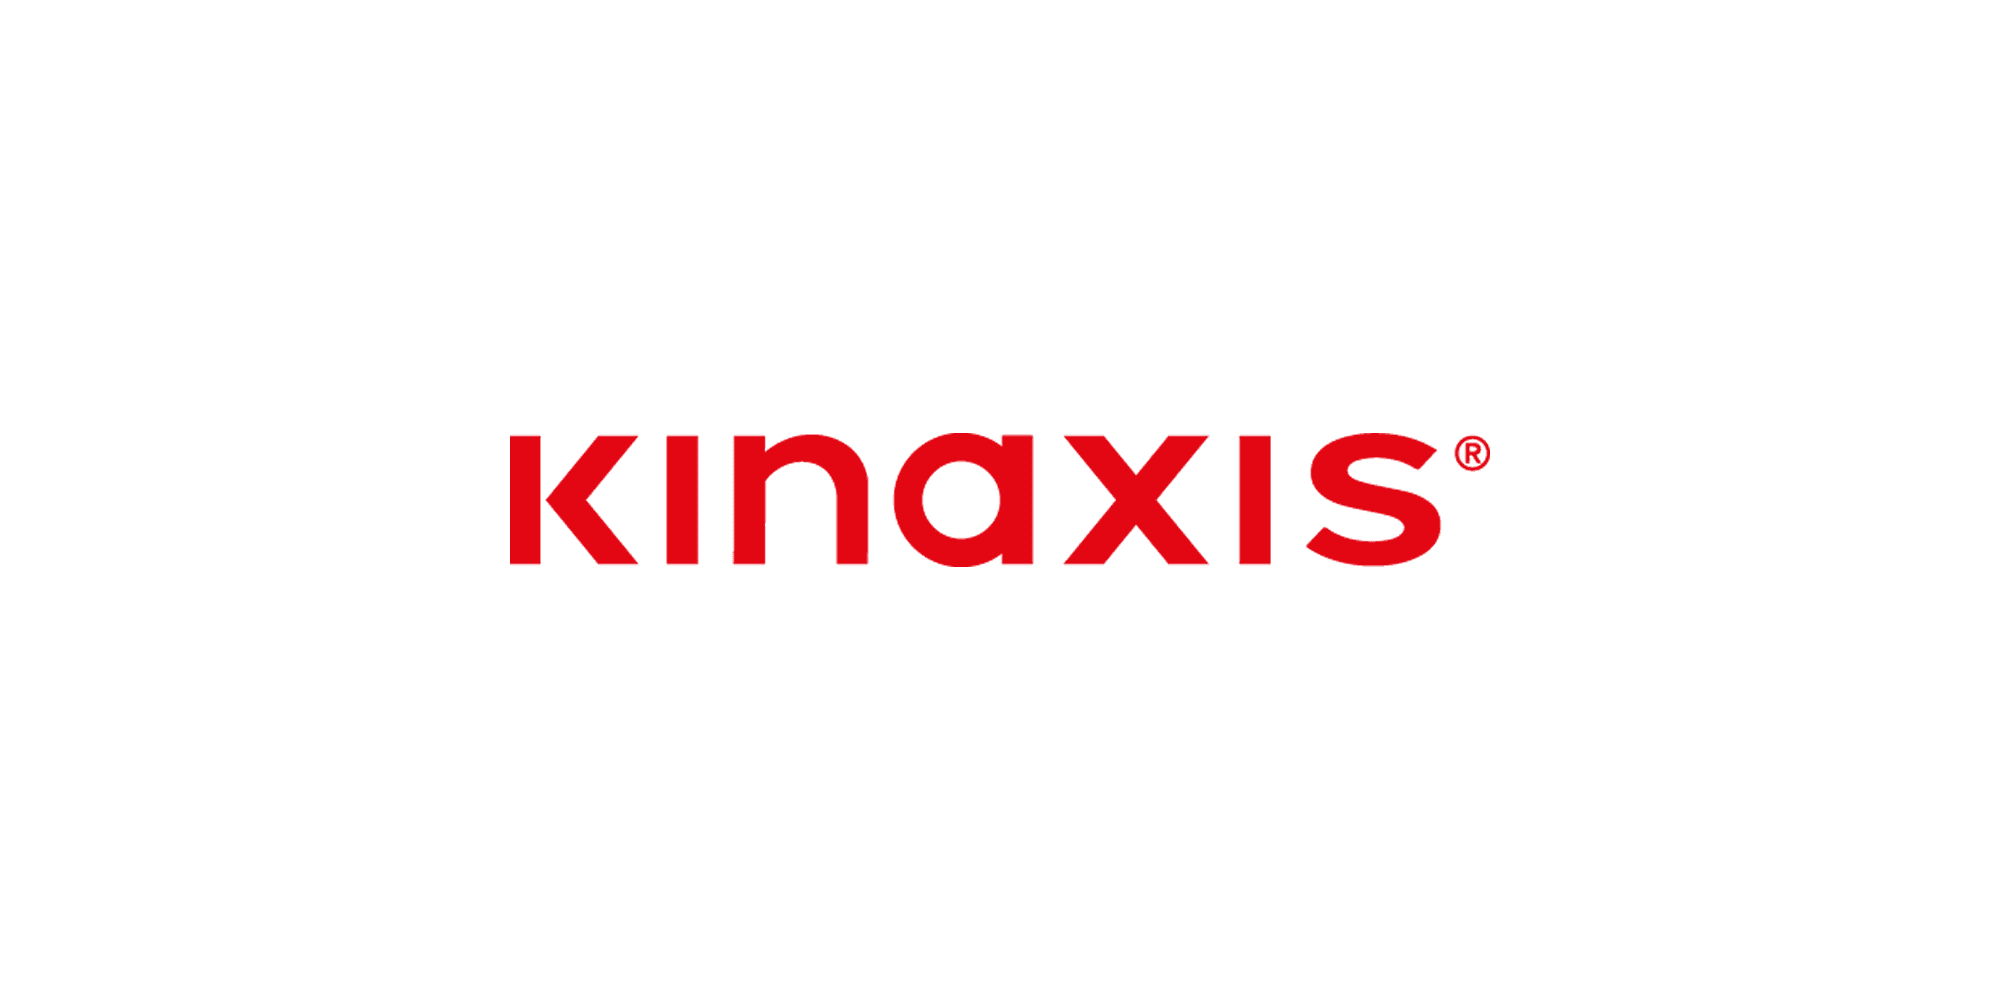 Product: Supply chain planning services and solutions | Kinaxis